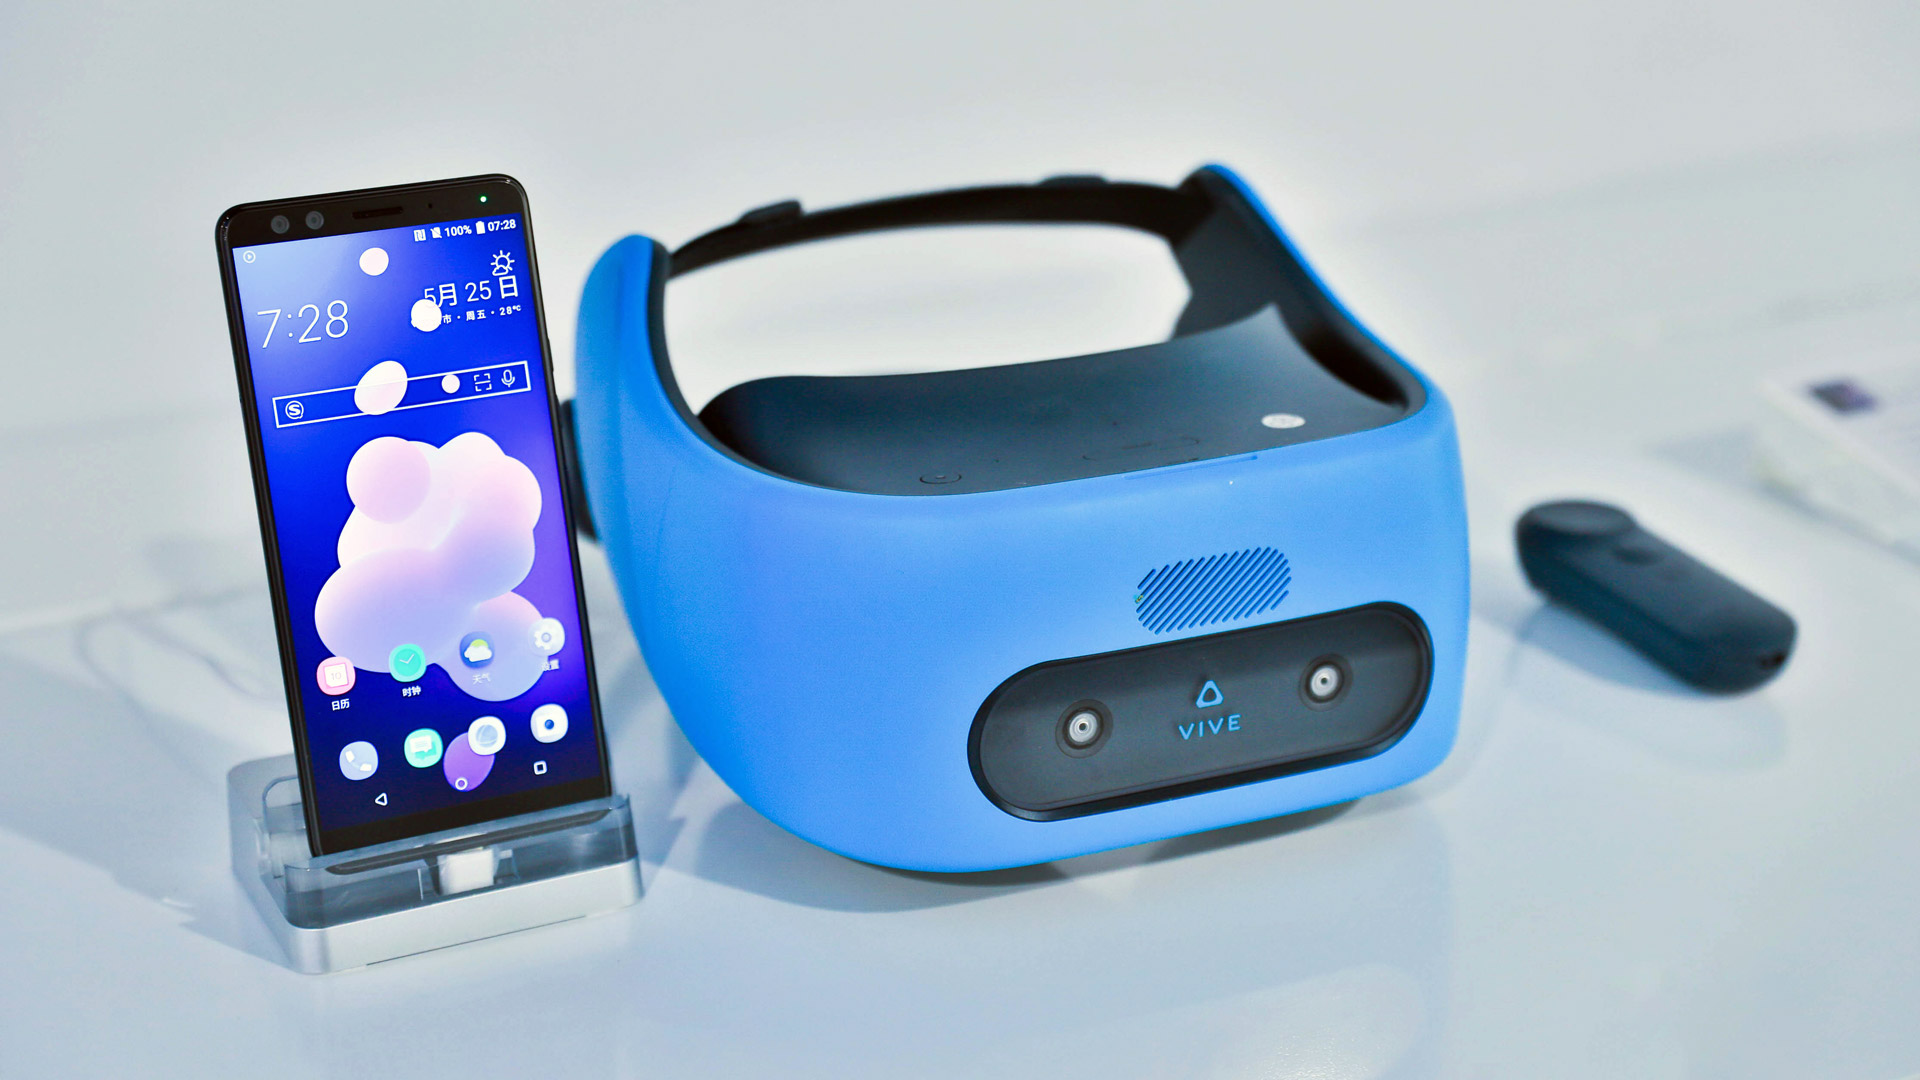 htc-vive-phone-an-unlikely-concept-but-still-cool